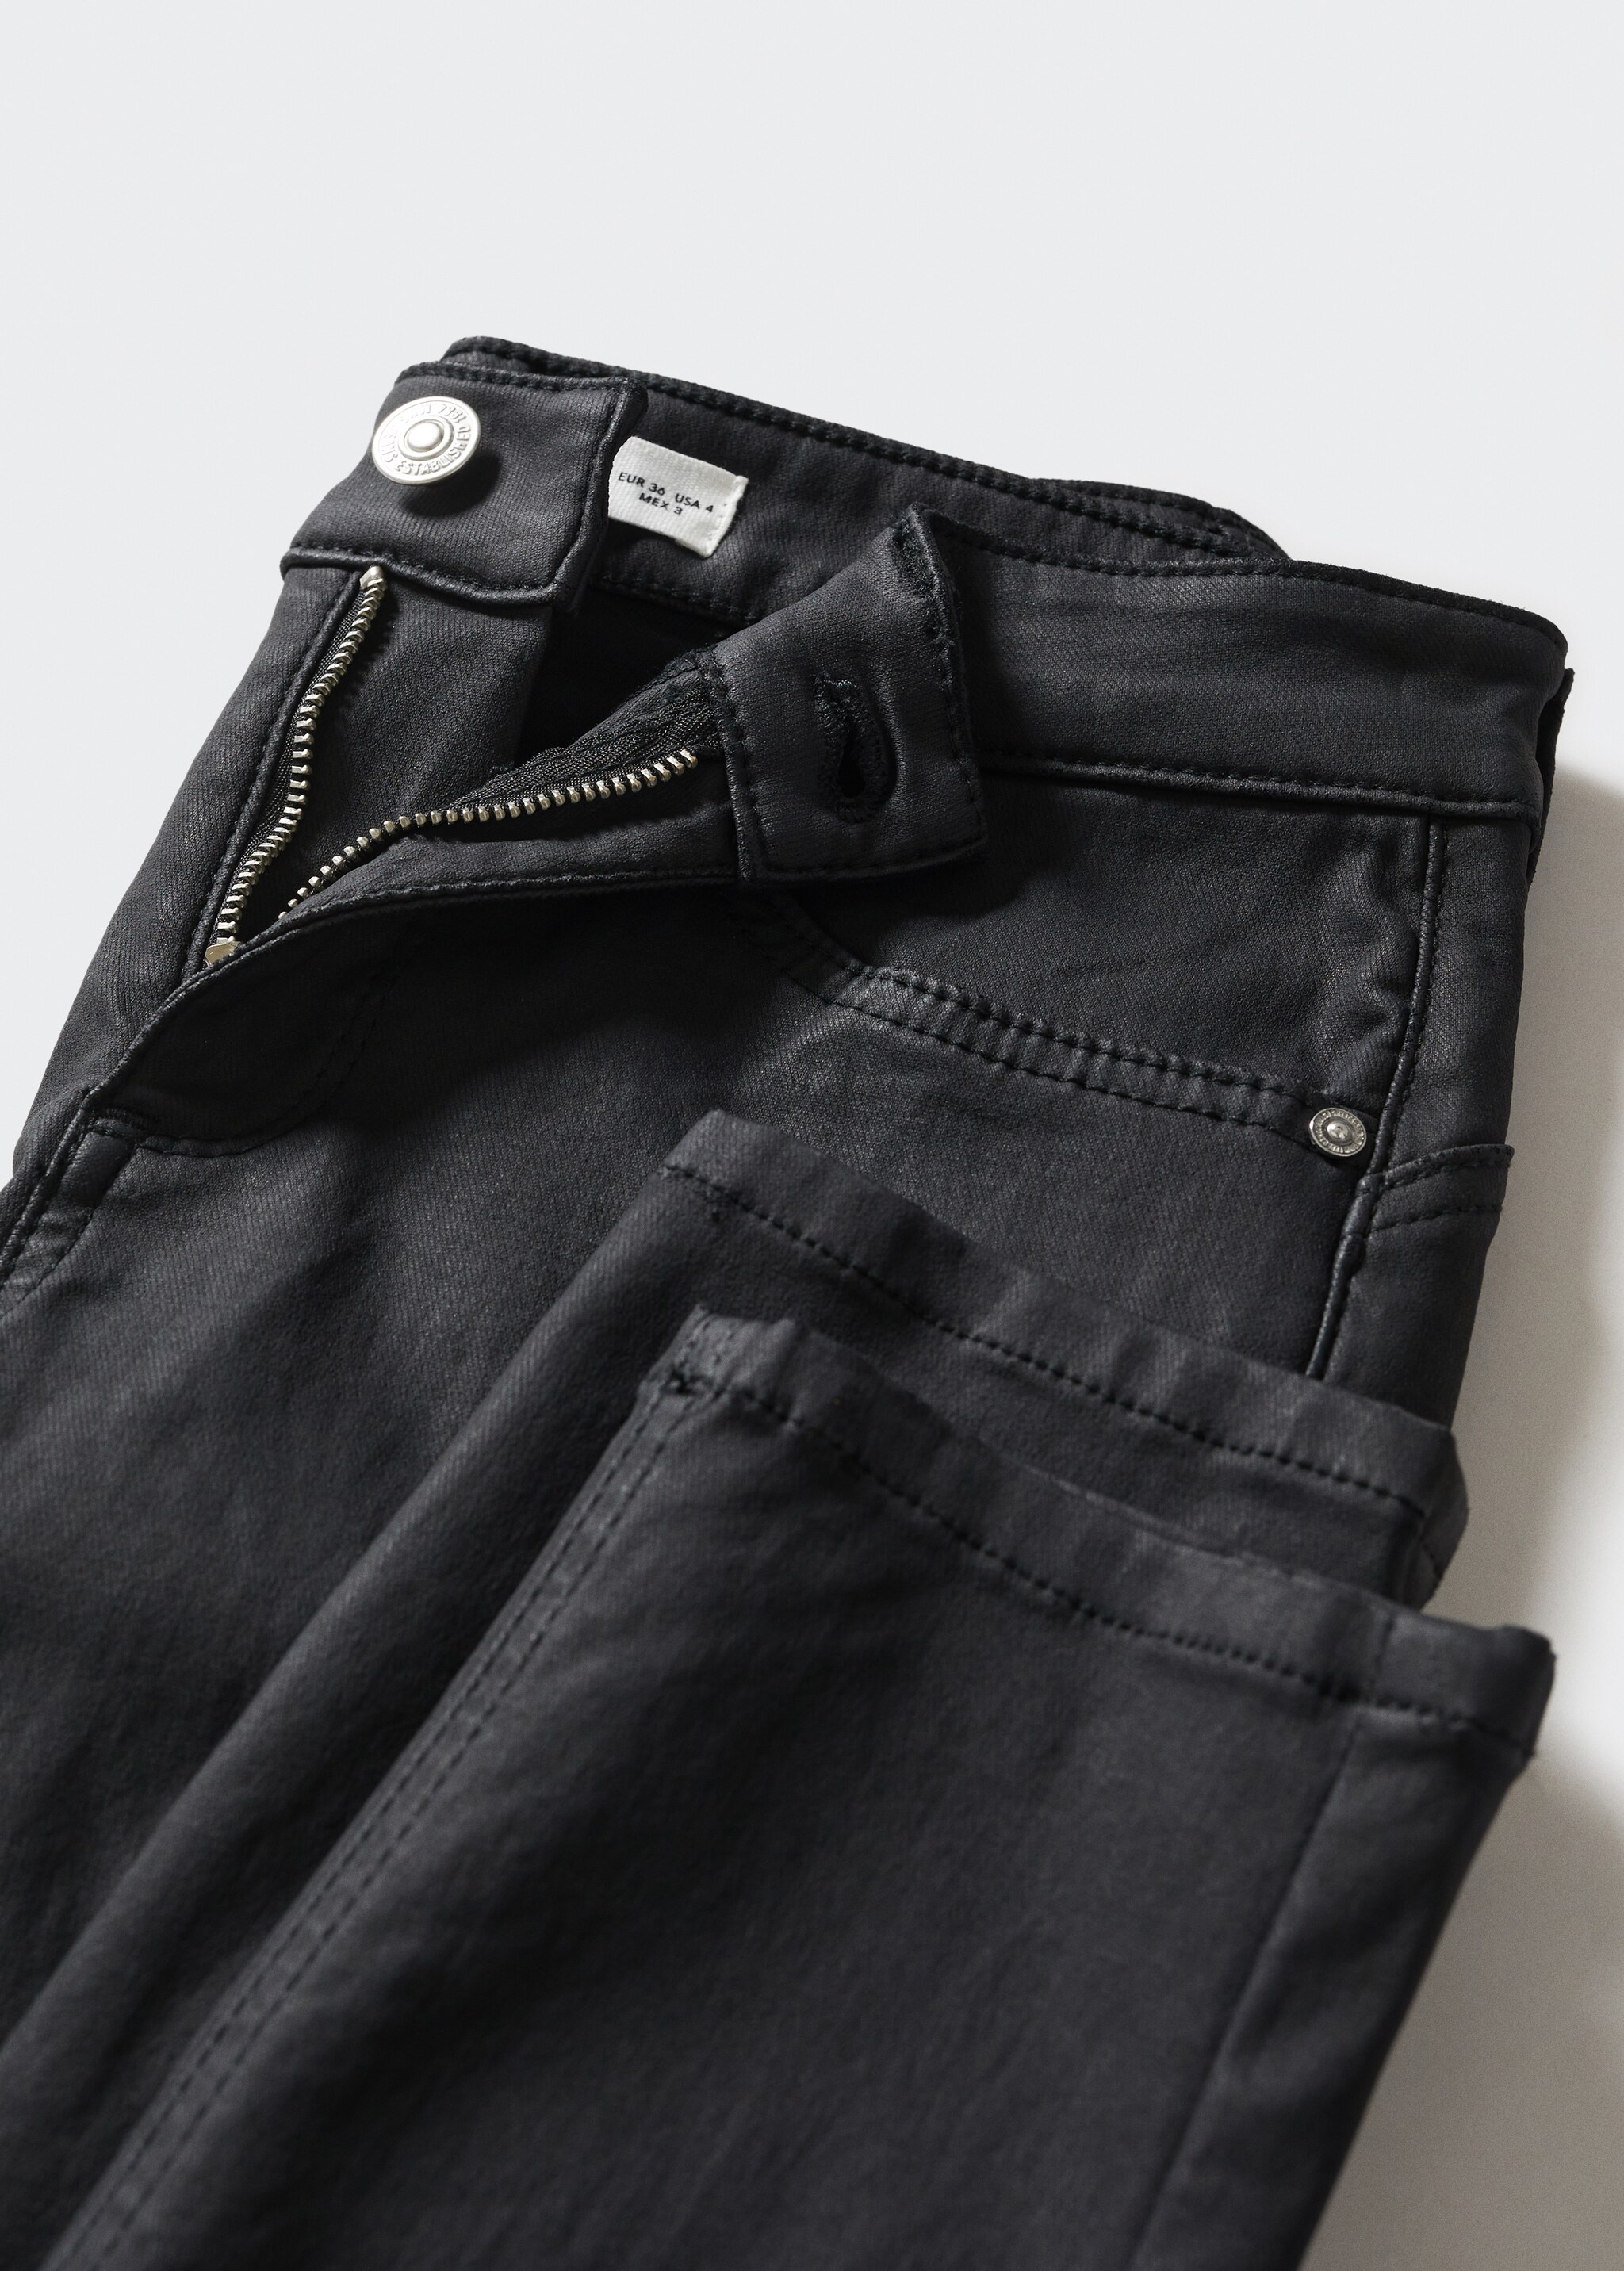 Skinny push-up waxed jeans - Details of the article 8